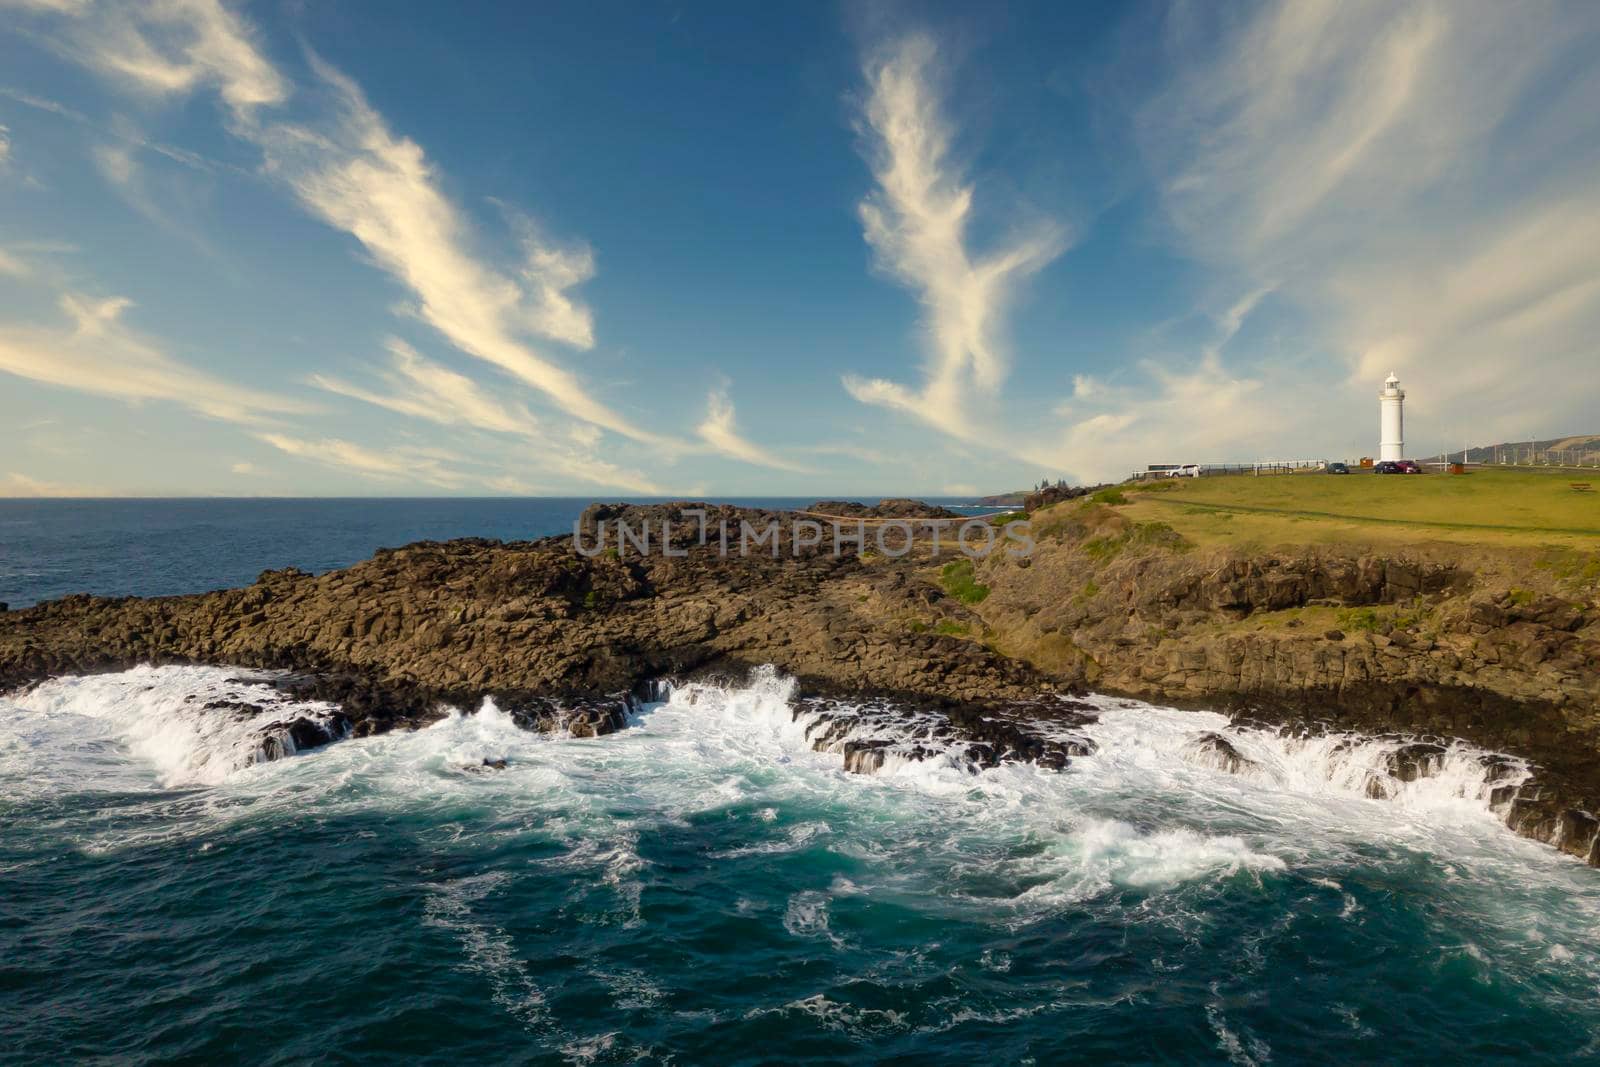 Drone aerial photograph of the Lighthouse in Kiama on the south coast of New South Wales in Australia